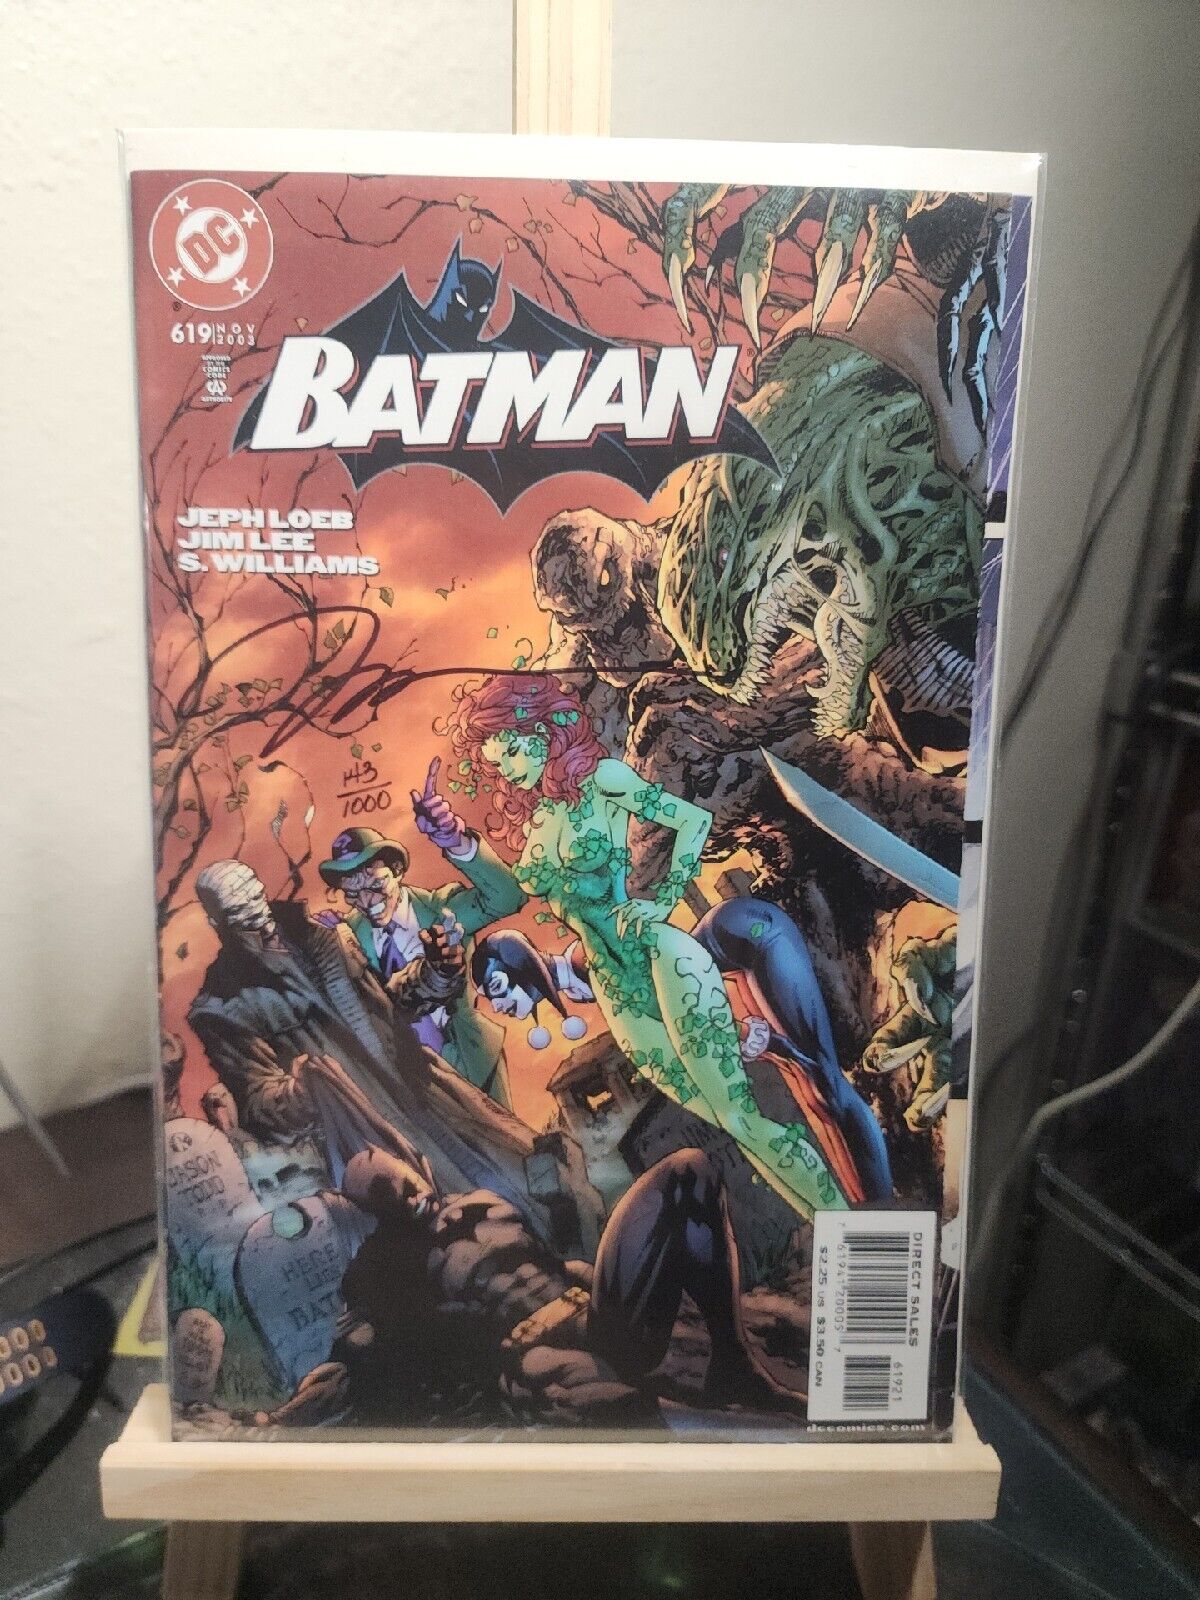 Batman 619 Villains Gatefold Cover Signed By Jim Lee 143 Of 1000 Certified.